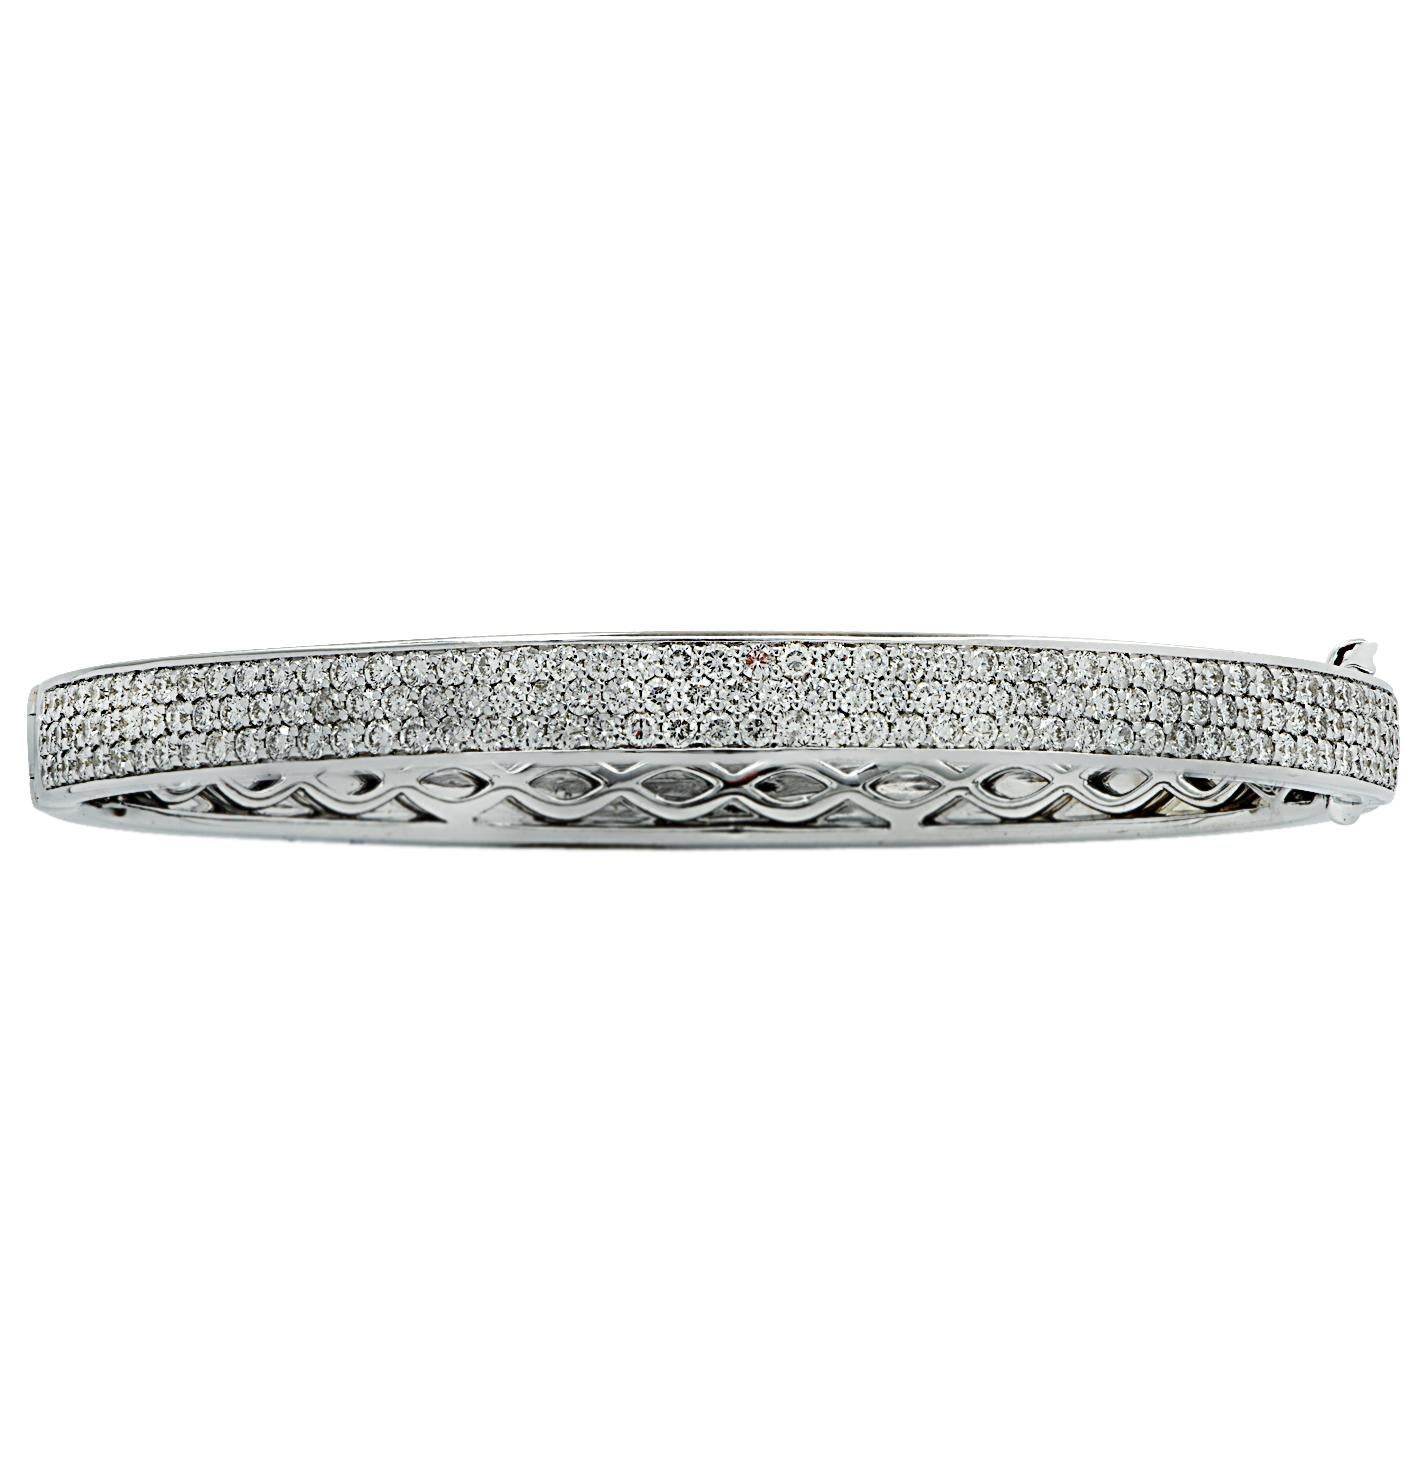 Stunning Vivid Diamonds Bangle Bracelet crafted in 18 karat white gold, featuring 296 round brilliant cut diamonds weighing 4.22 carats total, F-G color, VS-SI clarity. This spectacular bracelet is pave set with three rows of diamonds, which dazzle